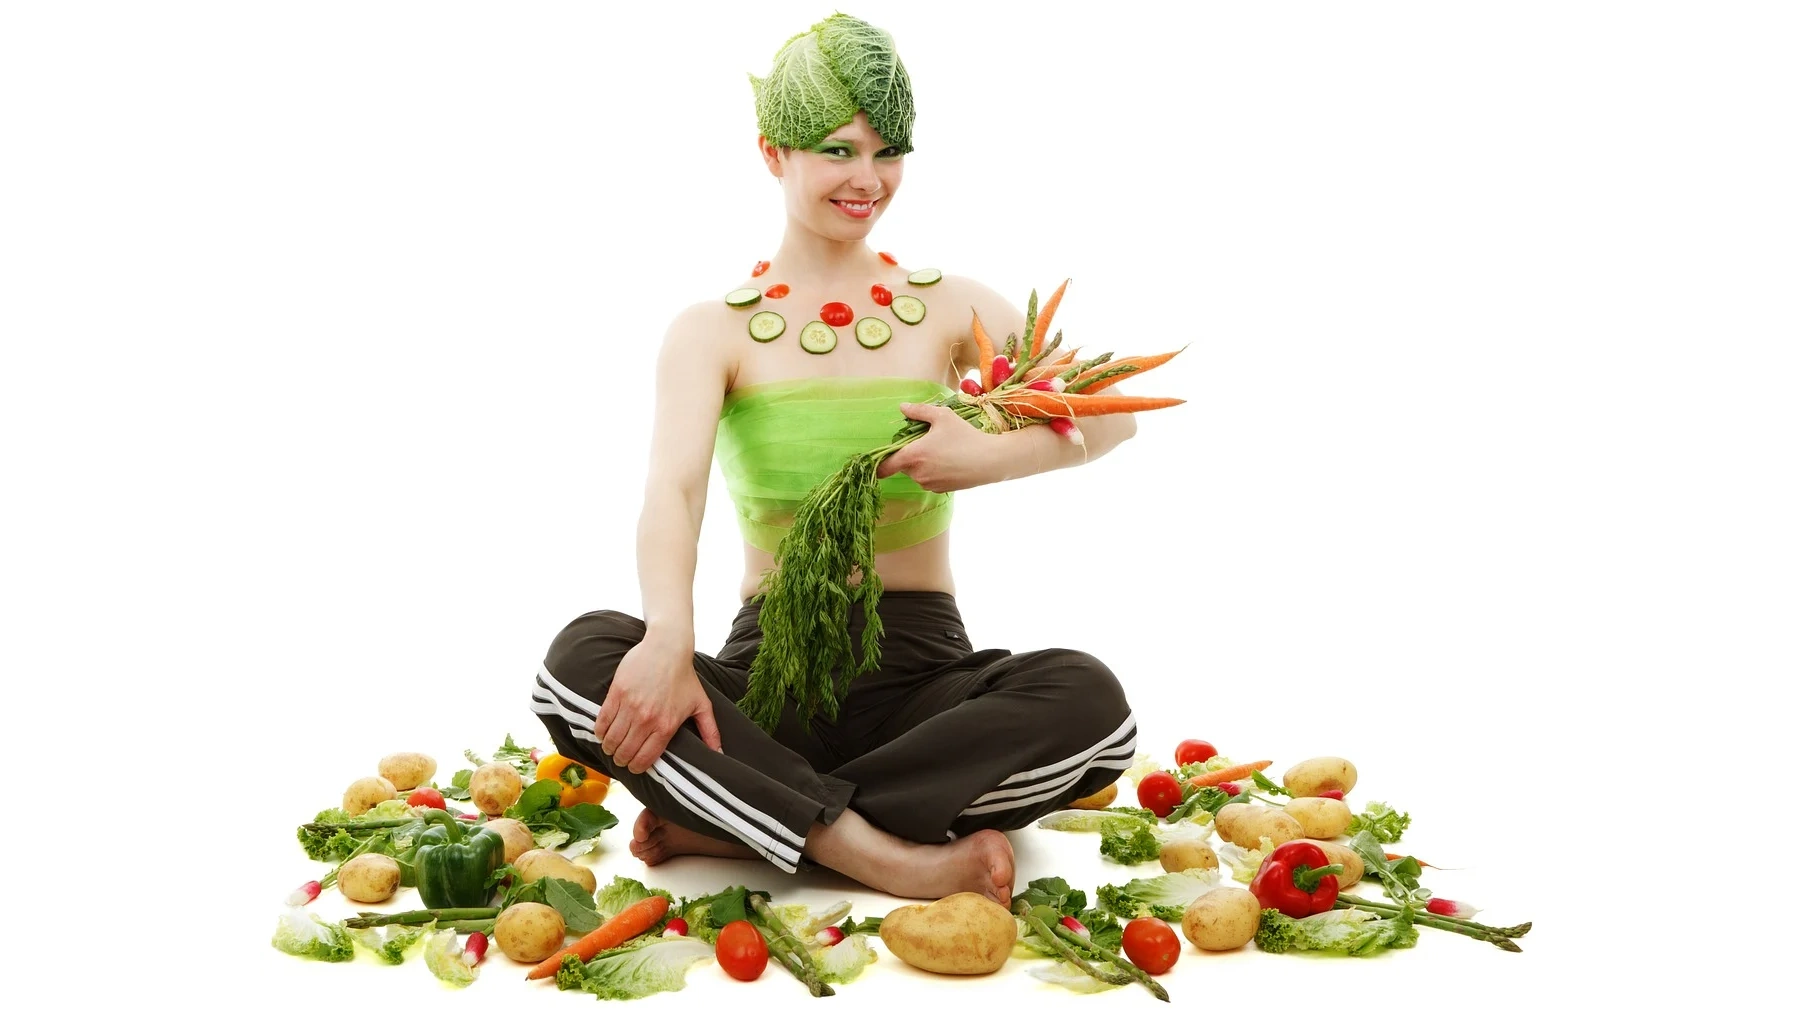 Young woman sits surrounded by vegetables, holds them in her arms and has cabbage leaves on her head.